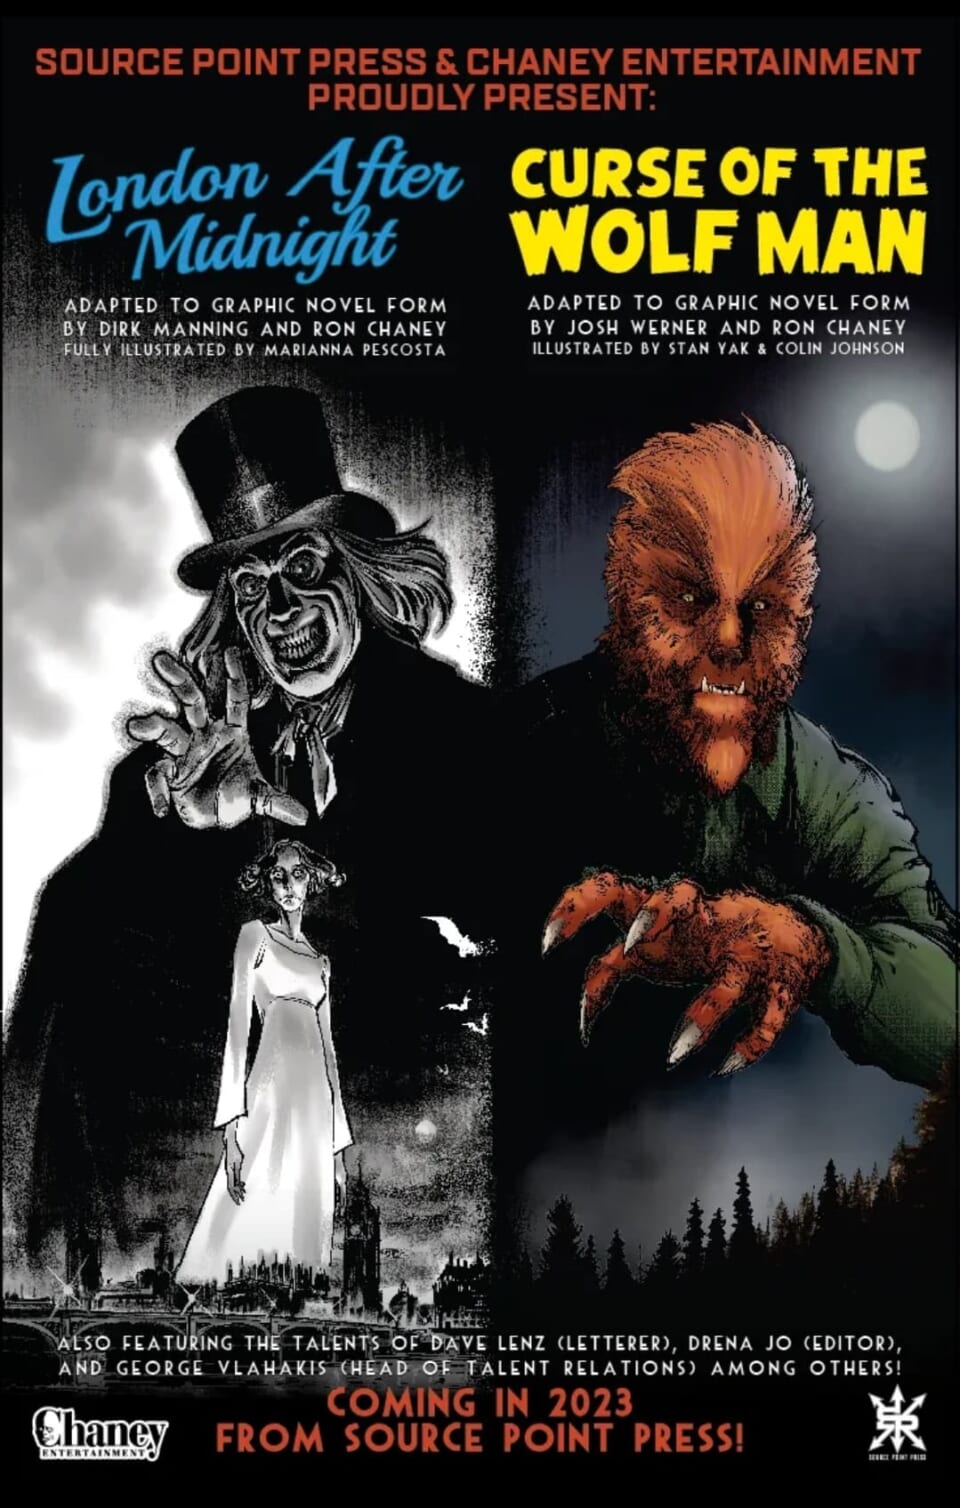 Source Point Press 1 960x1508 - Ron Chaney Talks New 'London After Midnight' And 'Curse of the Wolf Man' Comics